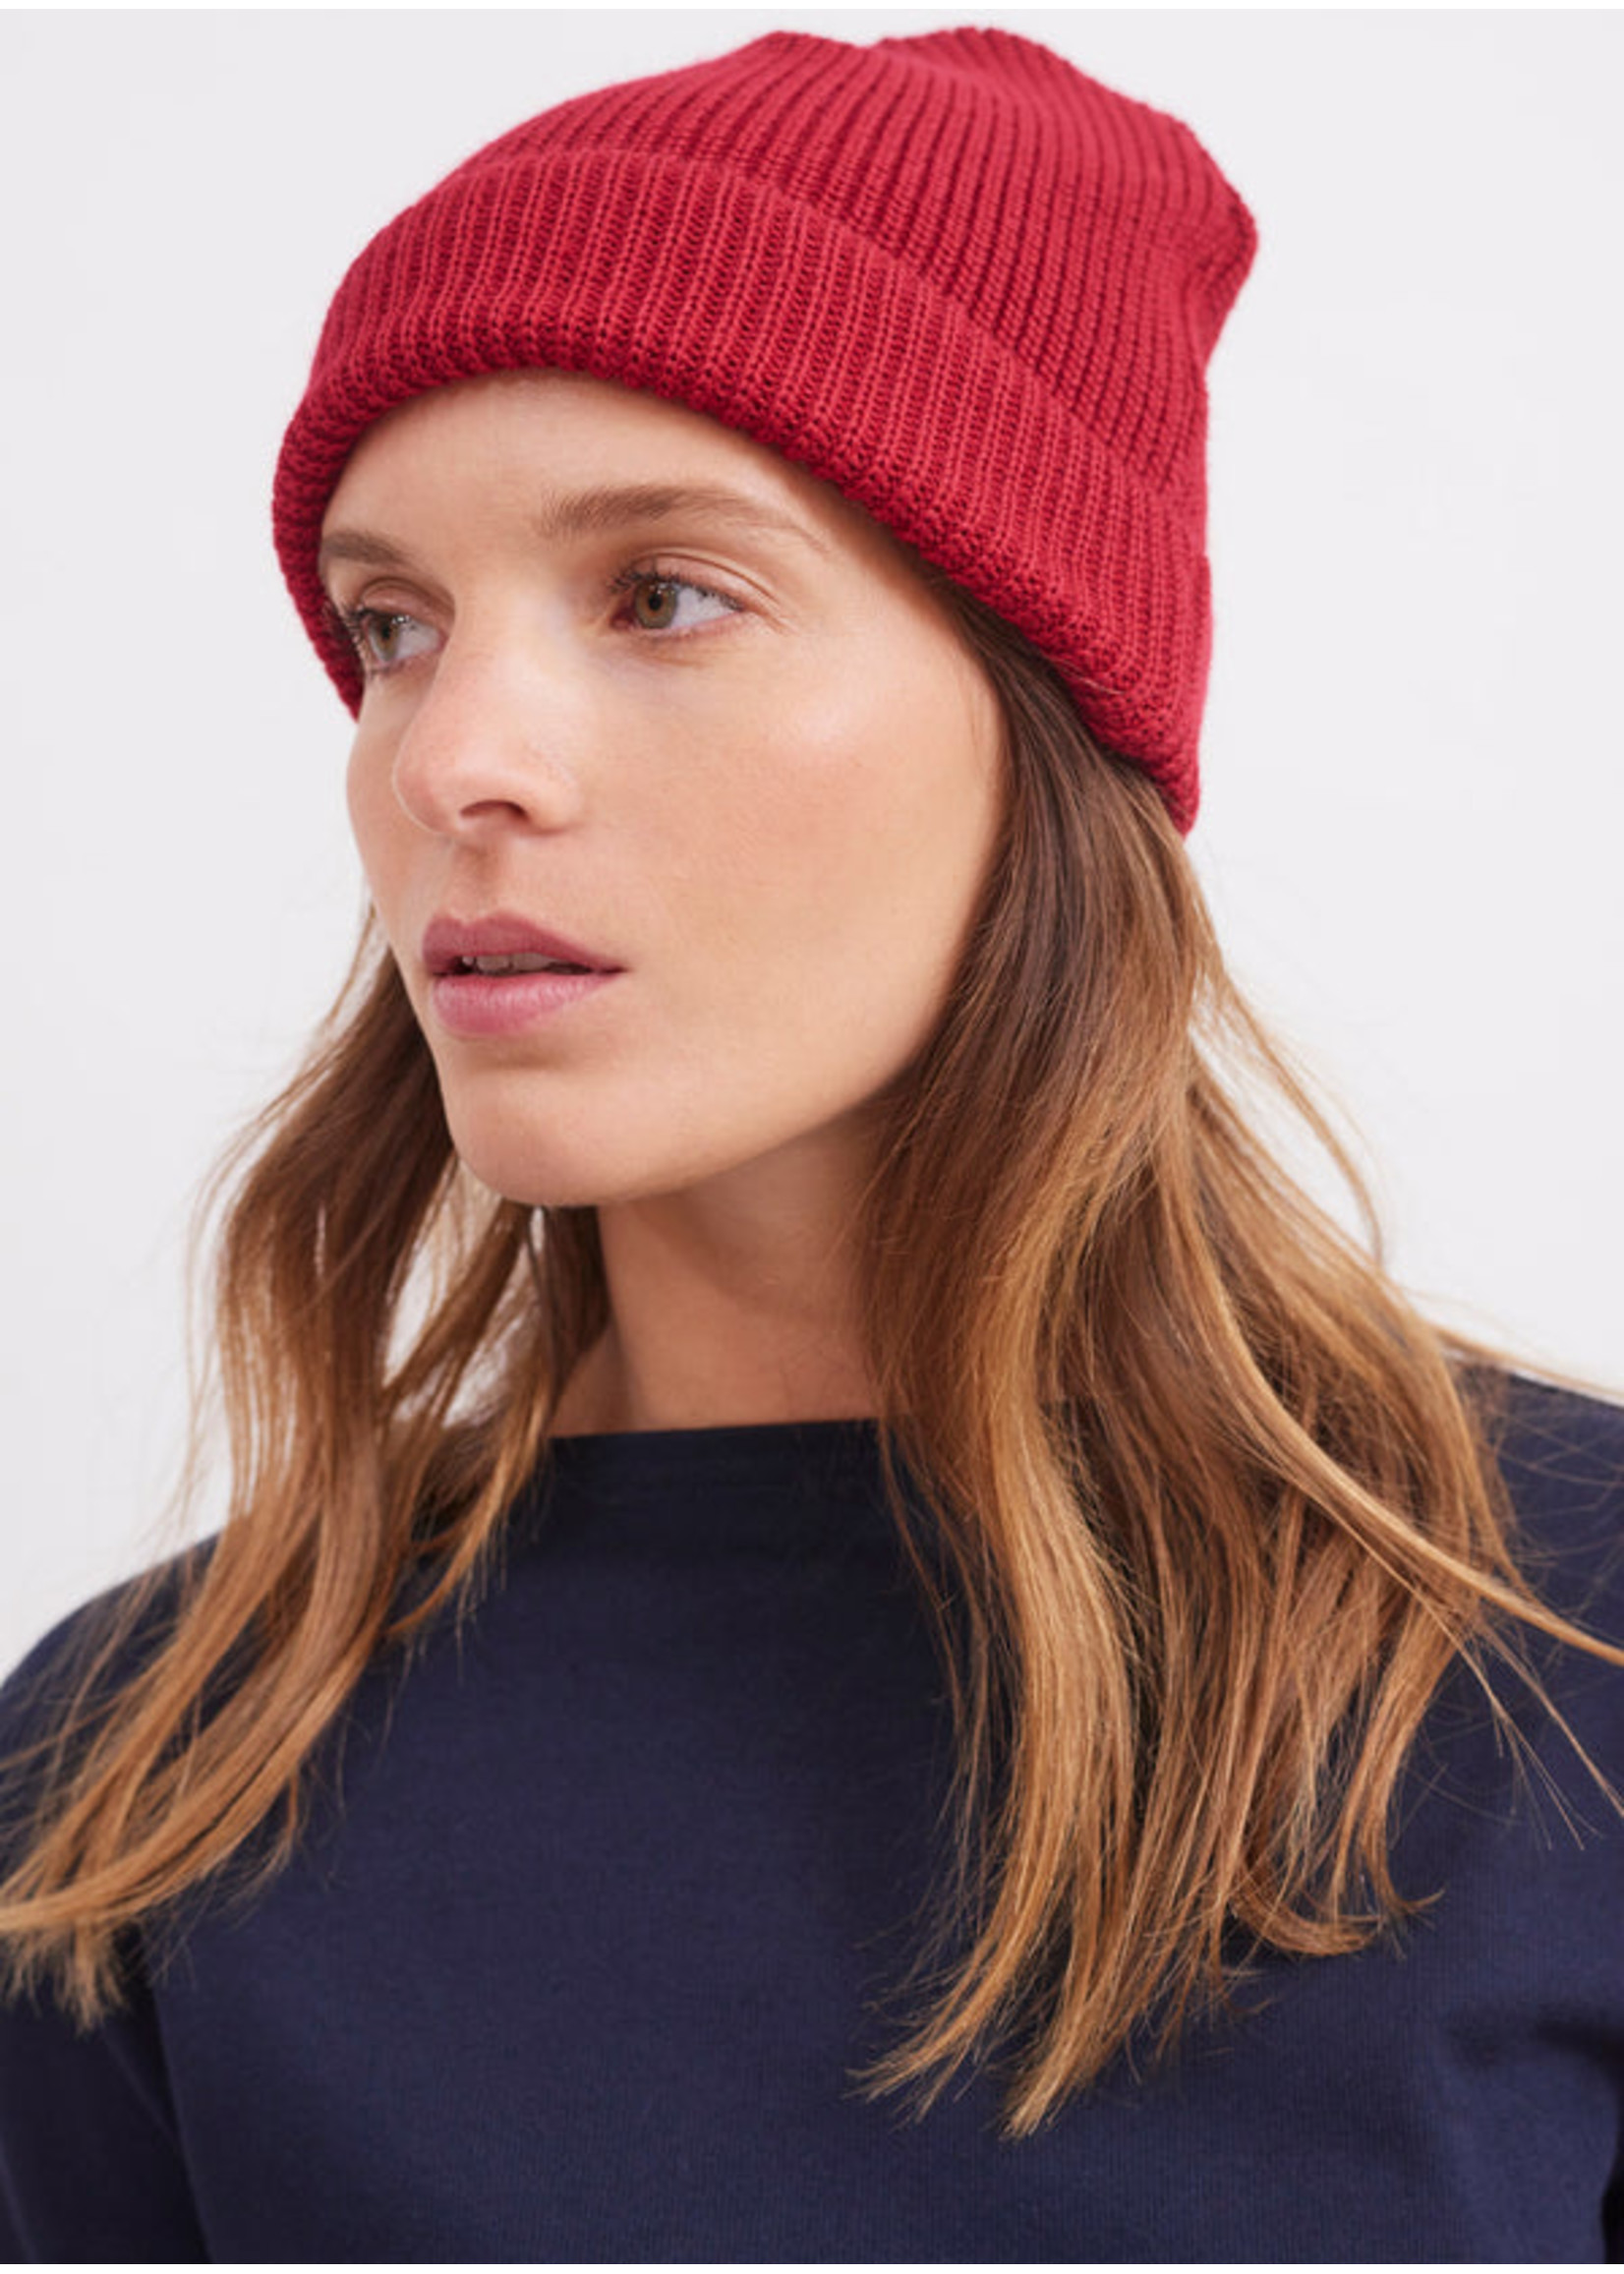 Unisex knitted wool beanie boutique - Lacroix espace